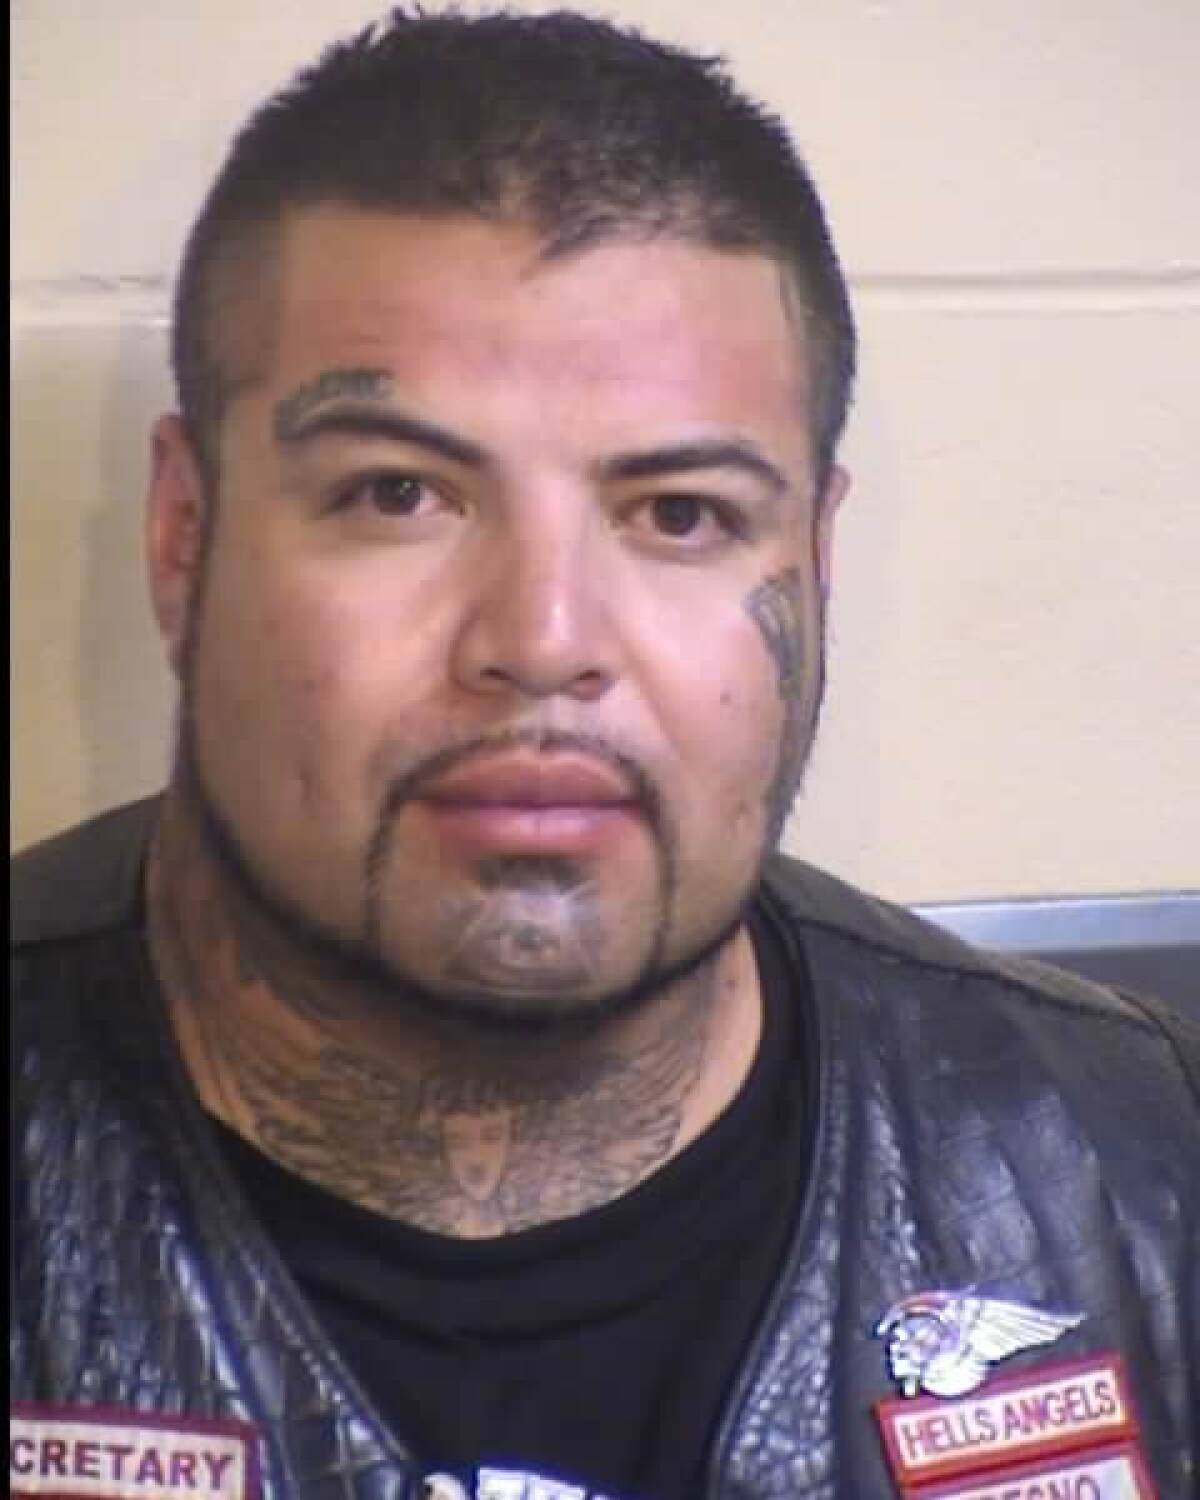 Officials arrested 31-year-old Rey Rodriguez on suspicion of being a felon in possession of a firearm.